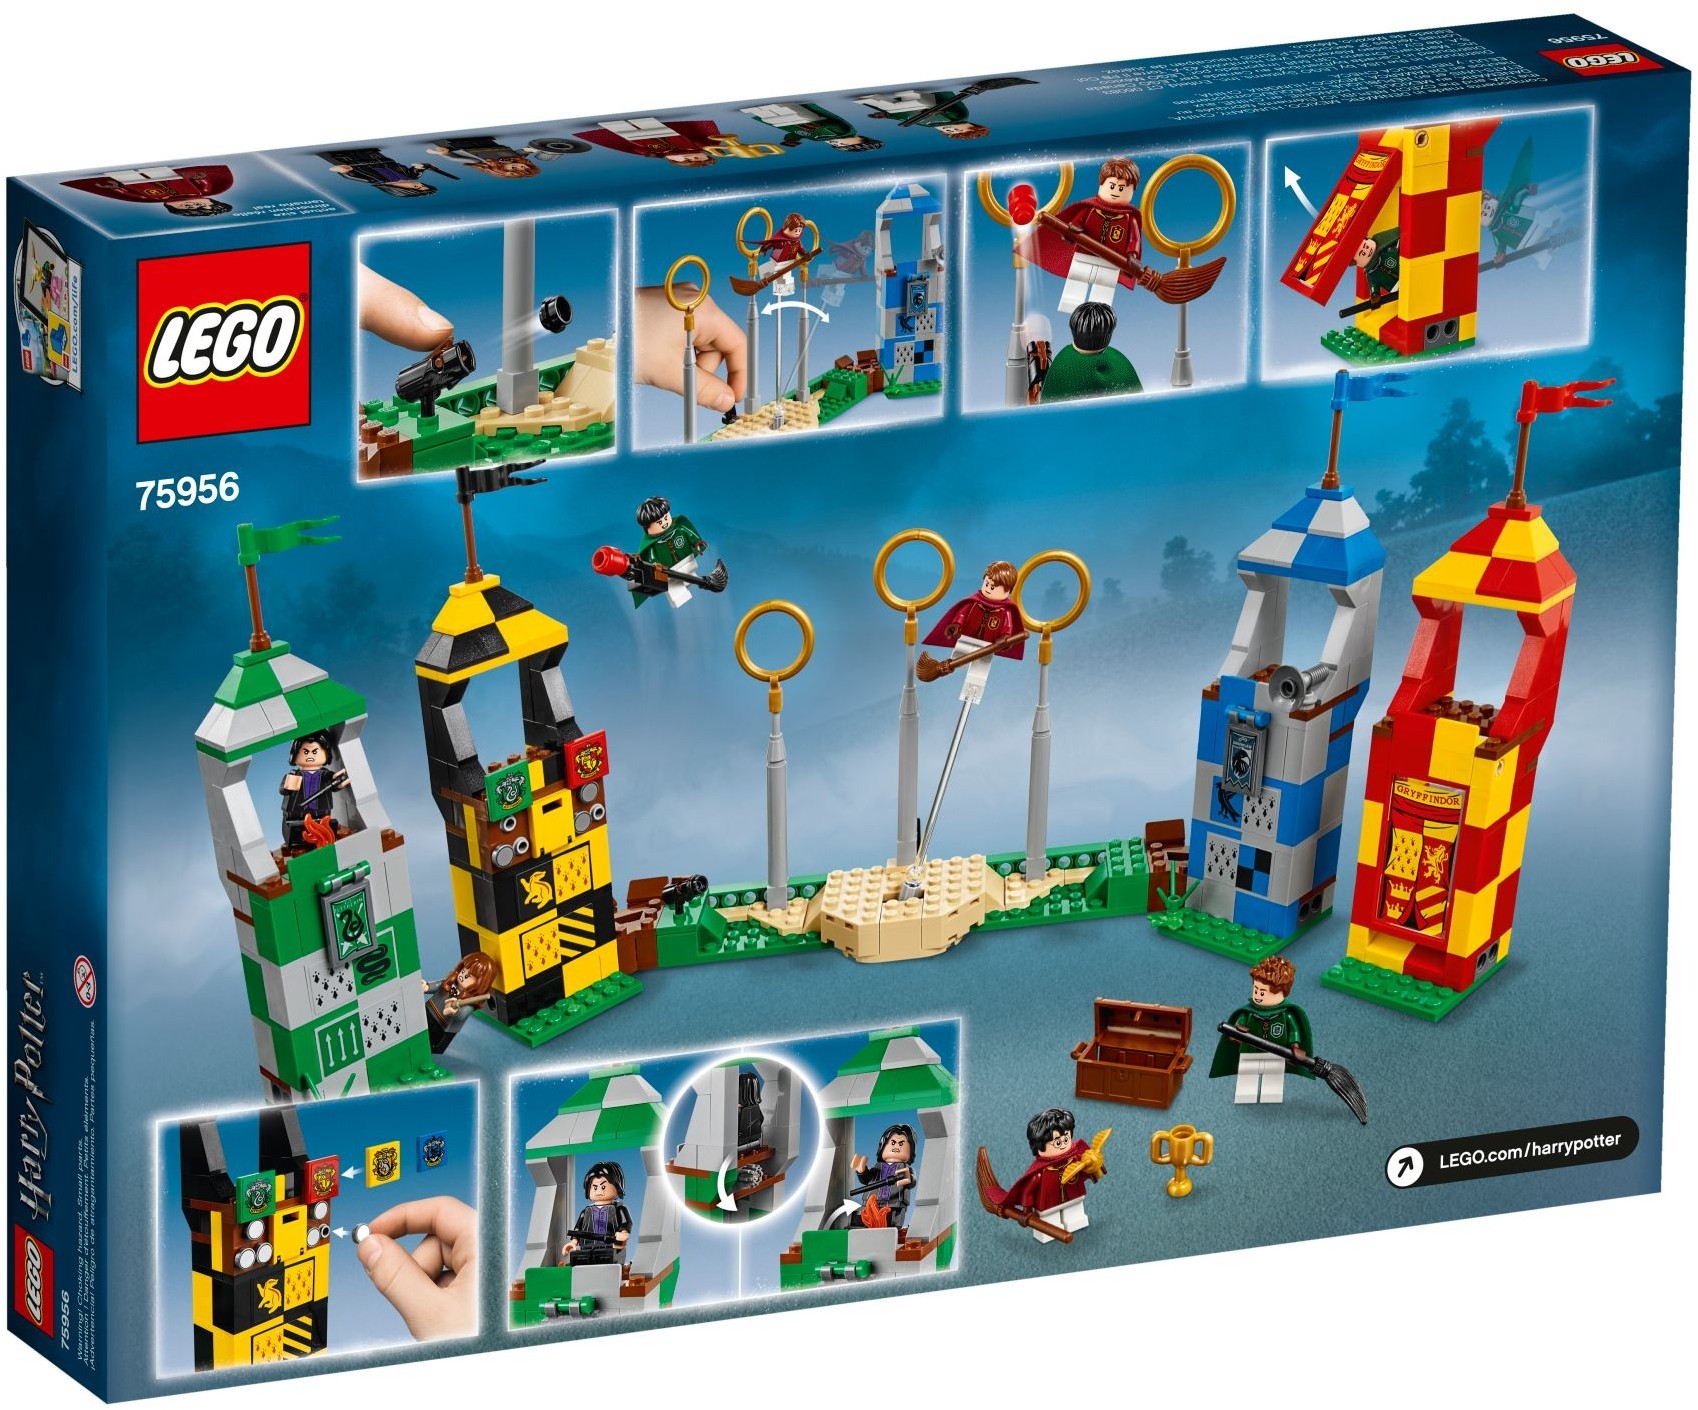 Buy LEGO Harry Potter - Quidditch Match (75956)